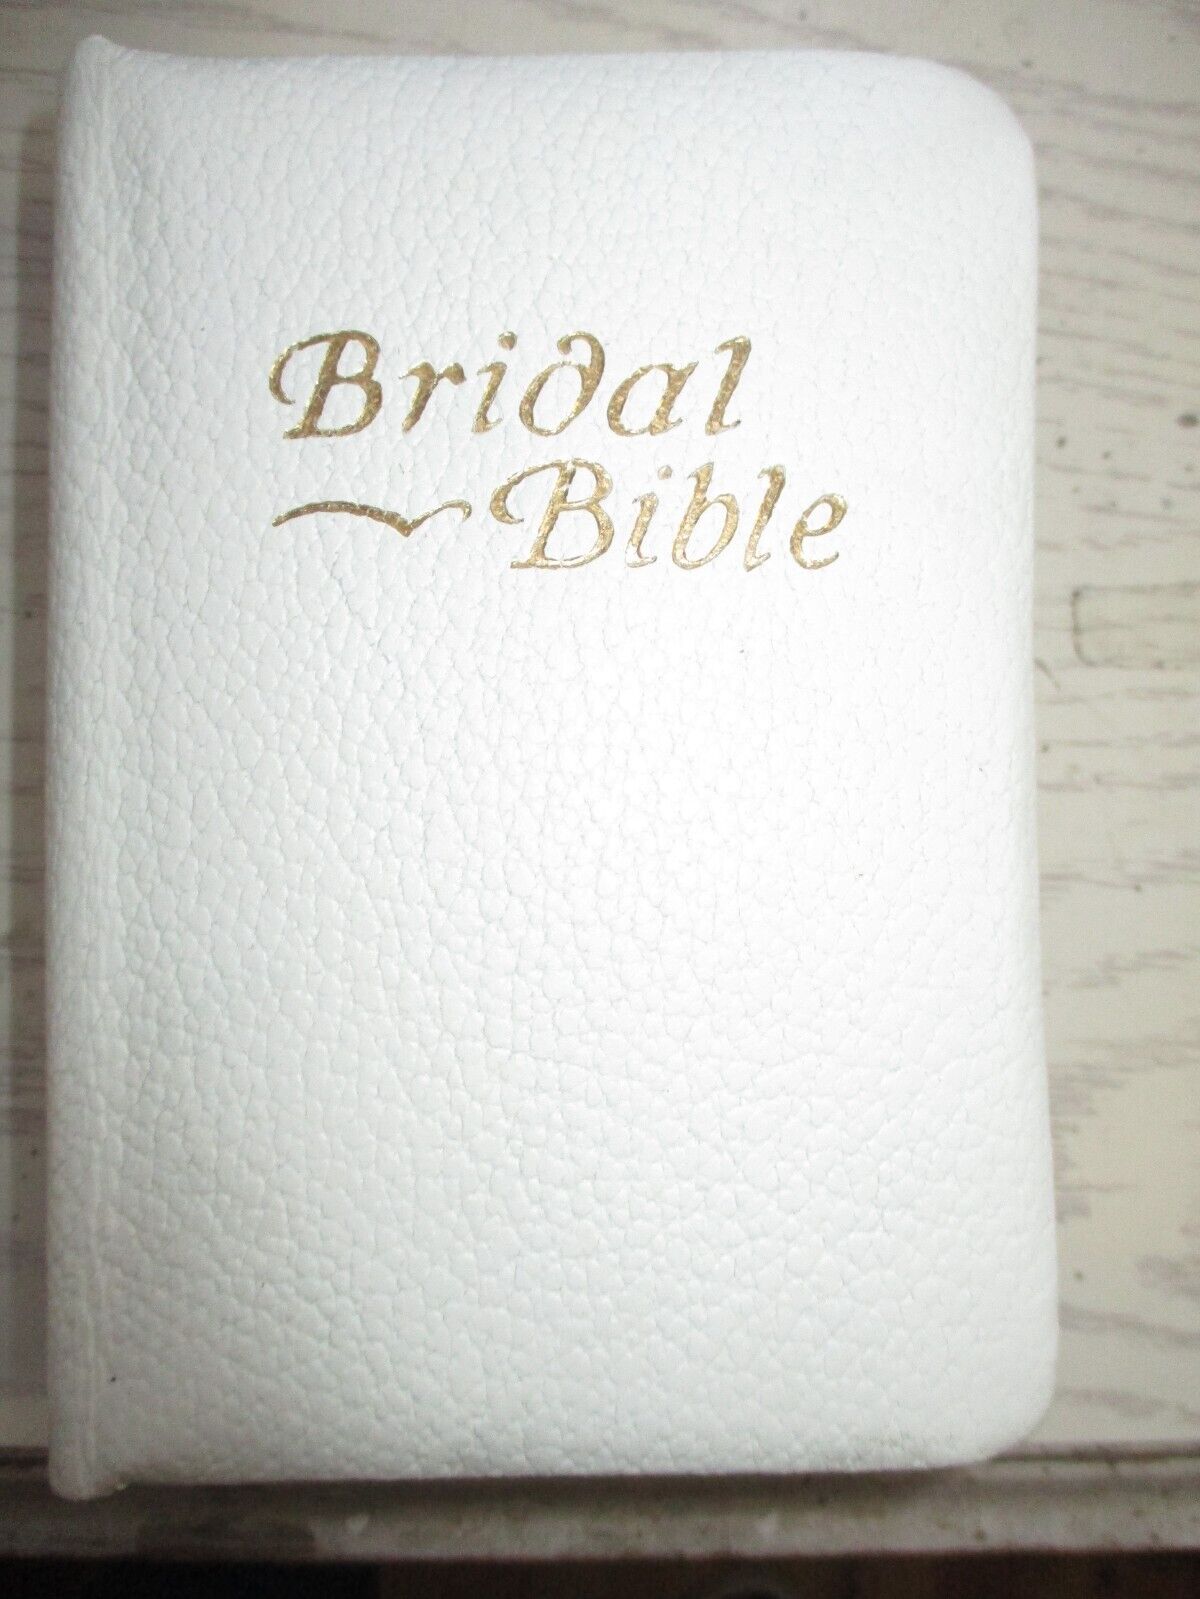 VINTAGE JEWISH BRIDAL BIBLE 1939 Leather Cover NOS in Original Box